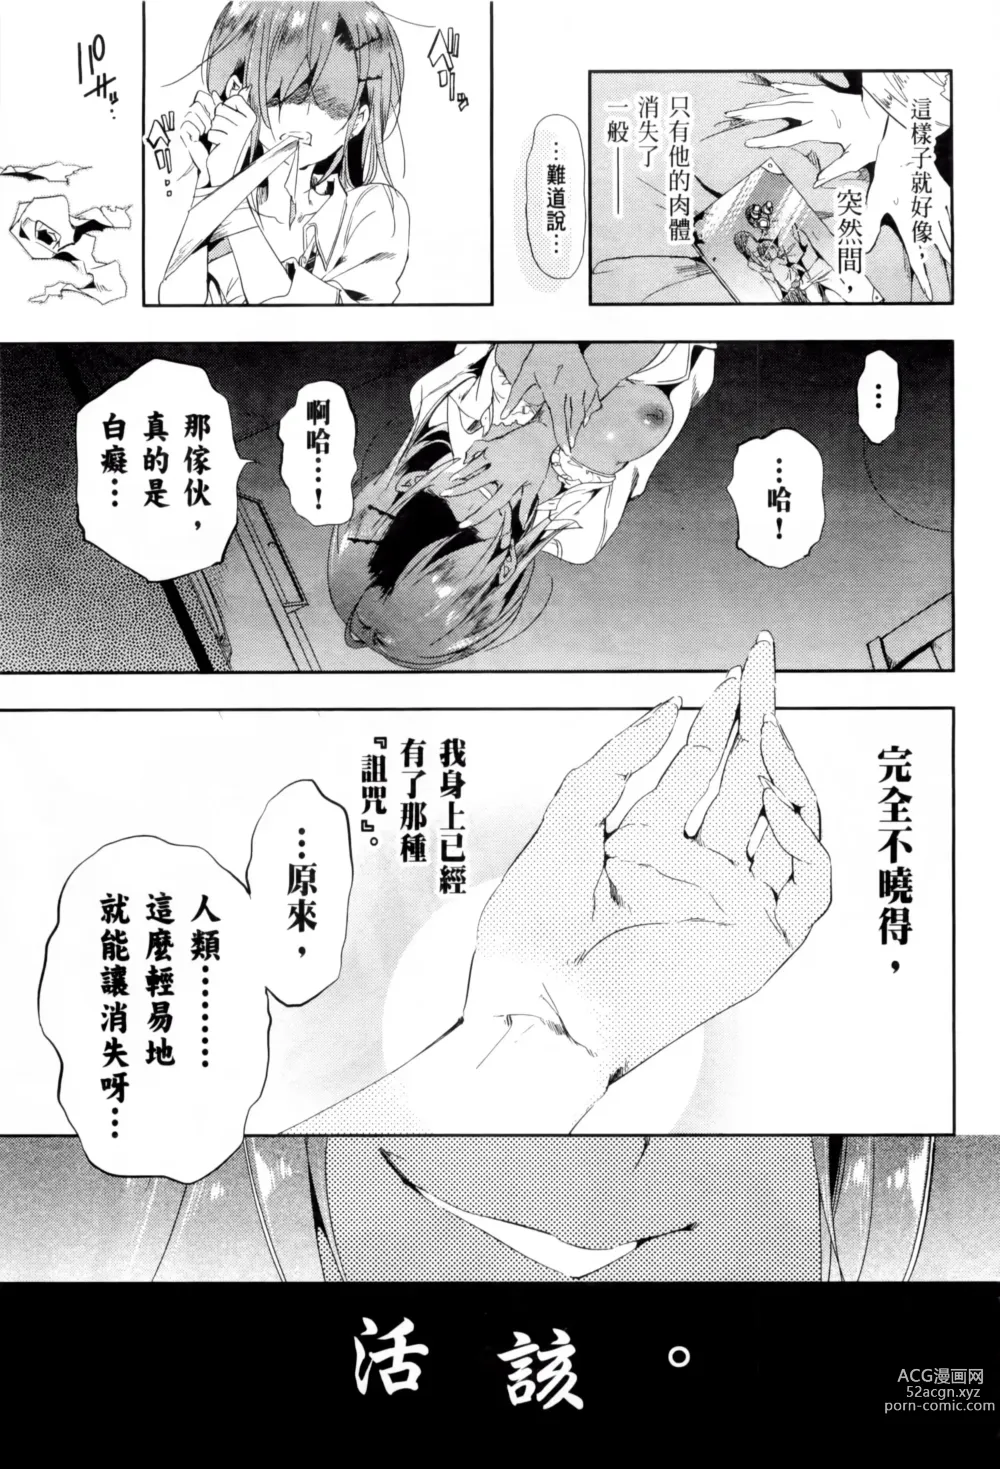 Page 161 of manga 神さまの怨結び 第2巻